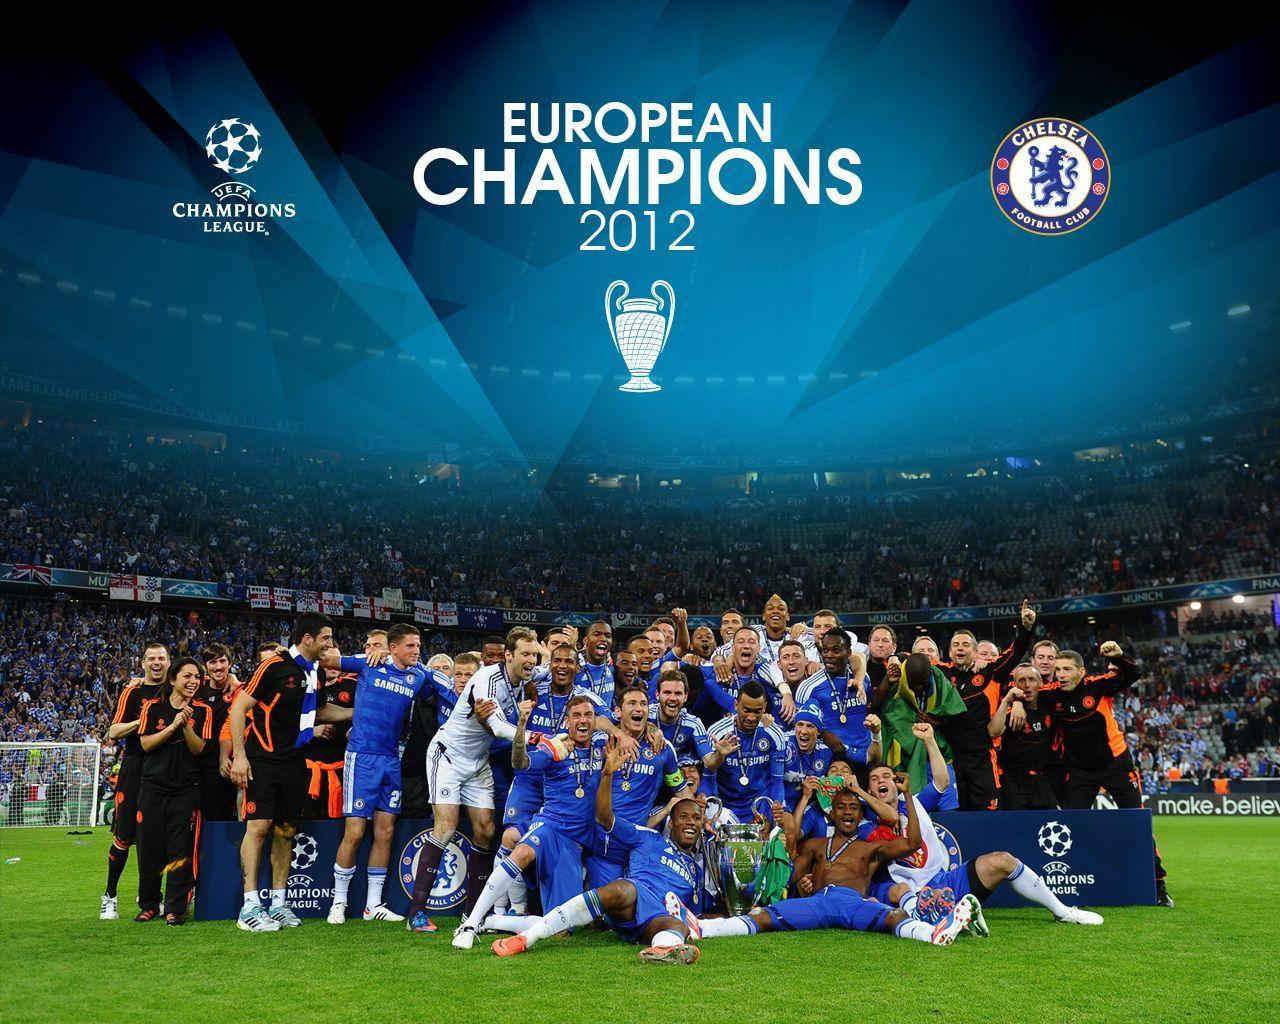 We are th CHAMPIONS